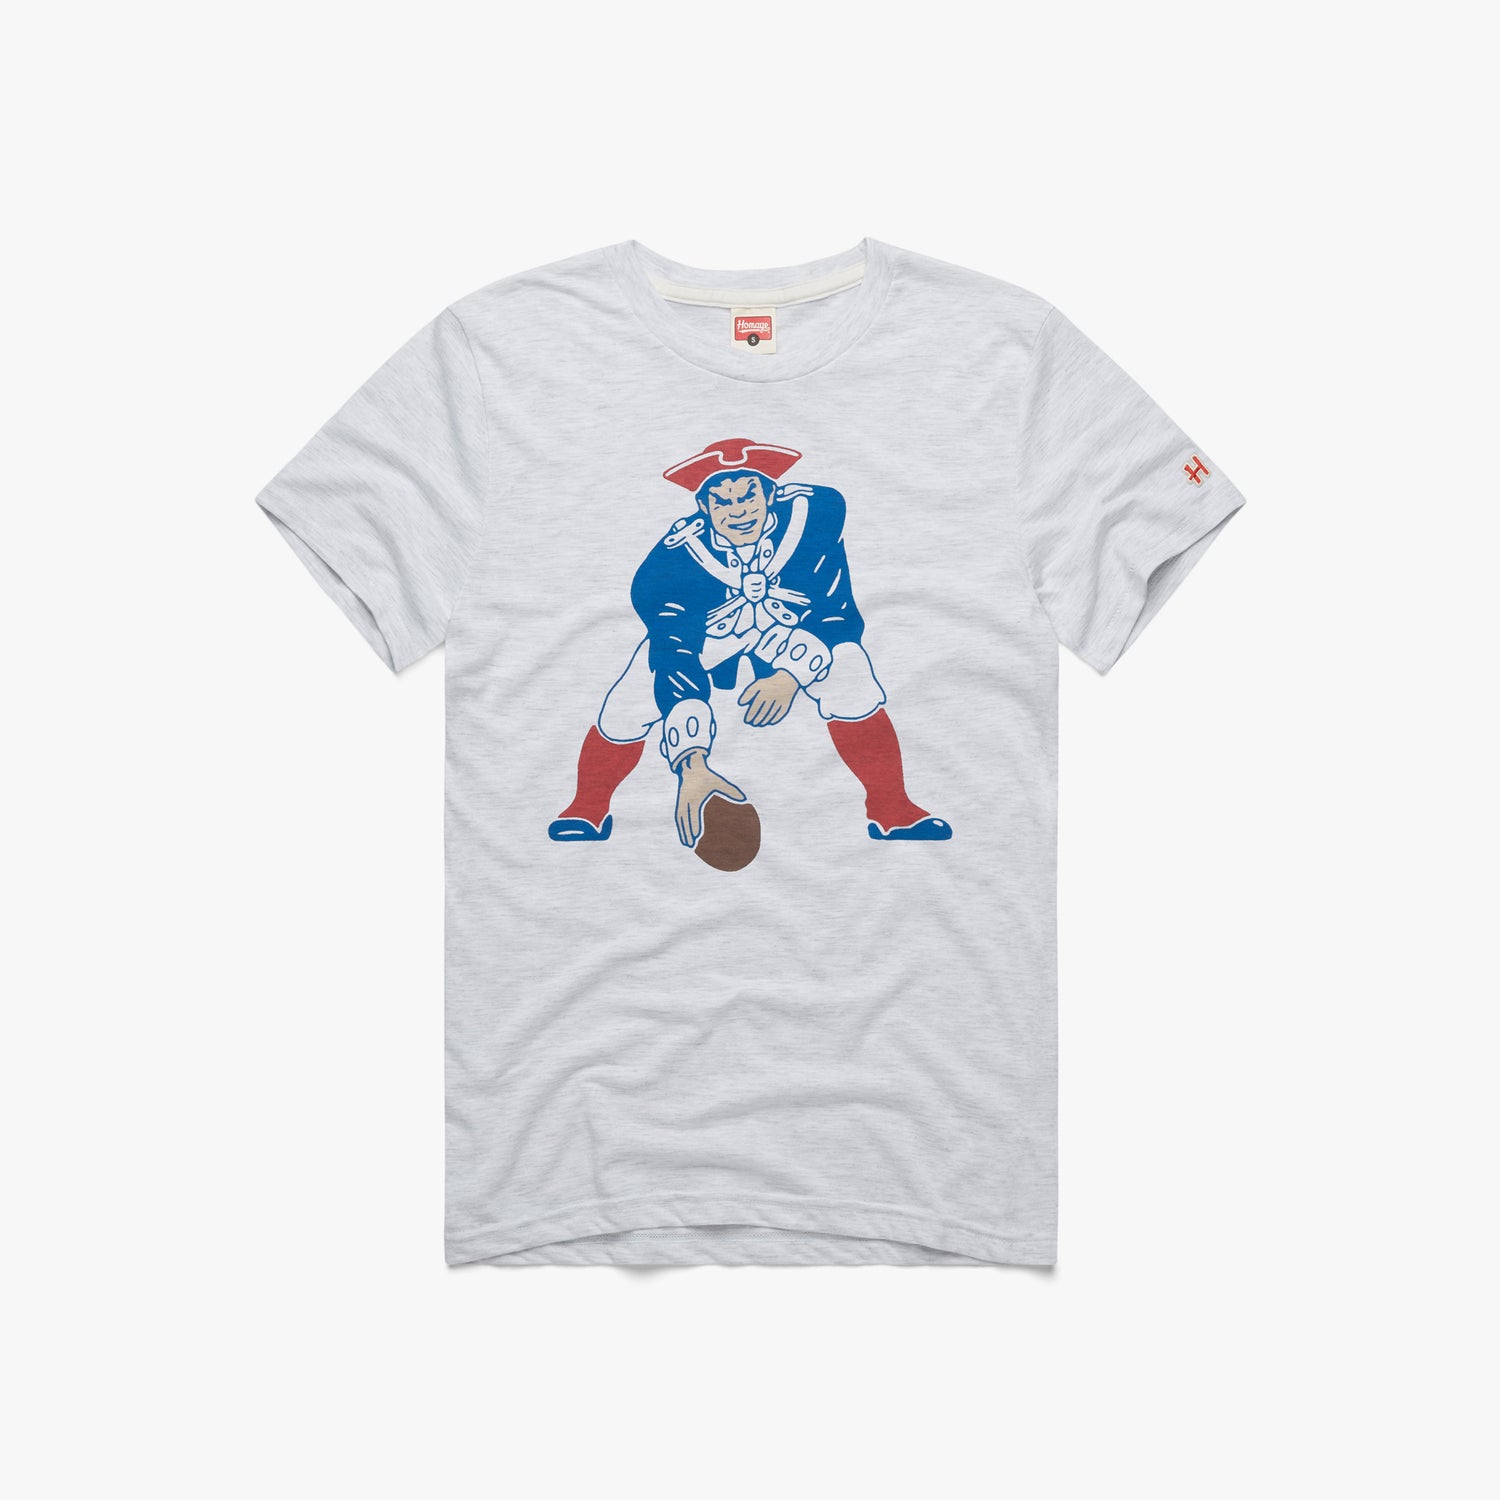 New England Patriots '79 T-Shirt from Homage. | Officially Licensed Vintage NFL Apparel from Homage Pro Shop.